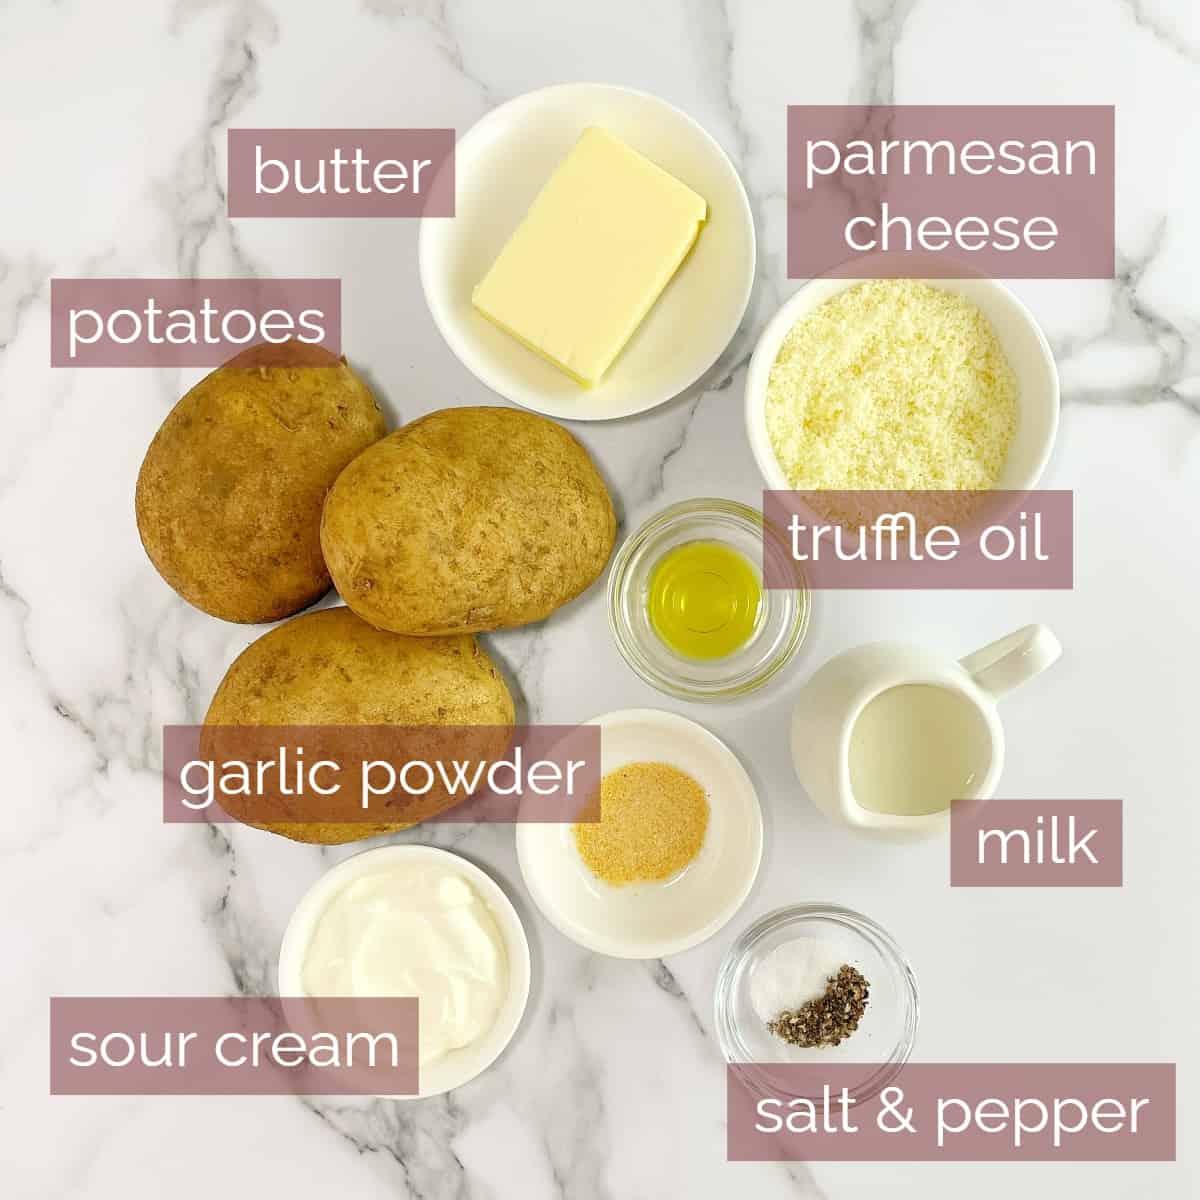 image showing ingredients needed to make this recipe including names